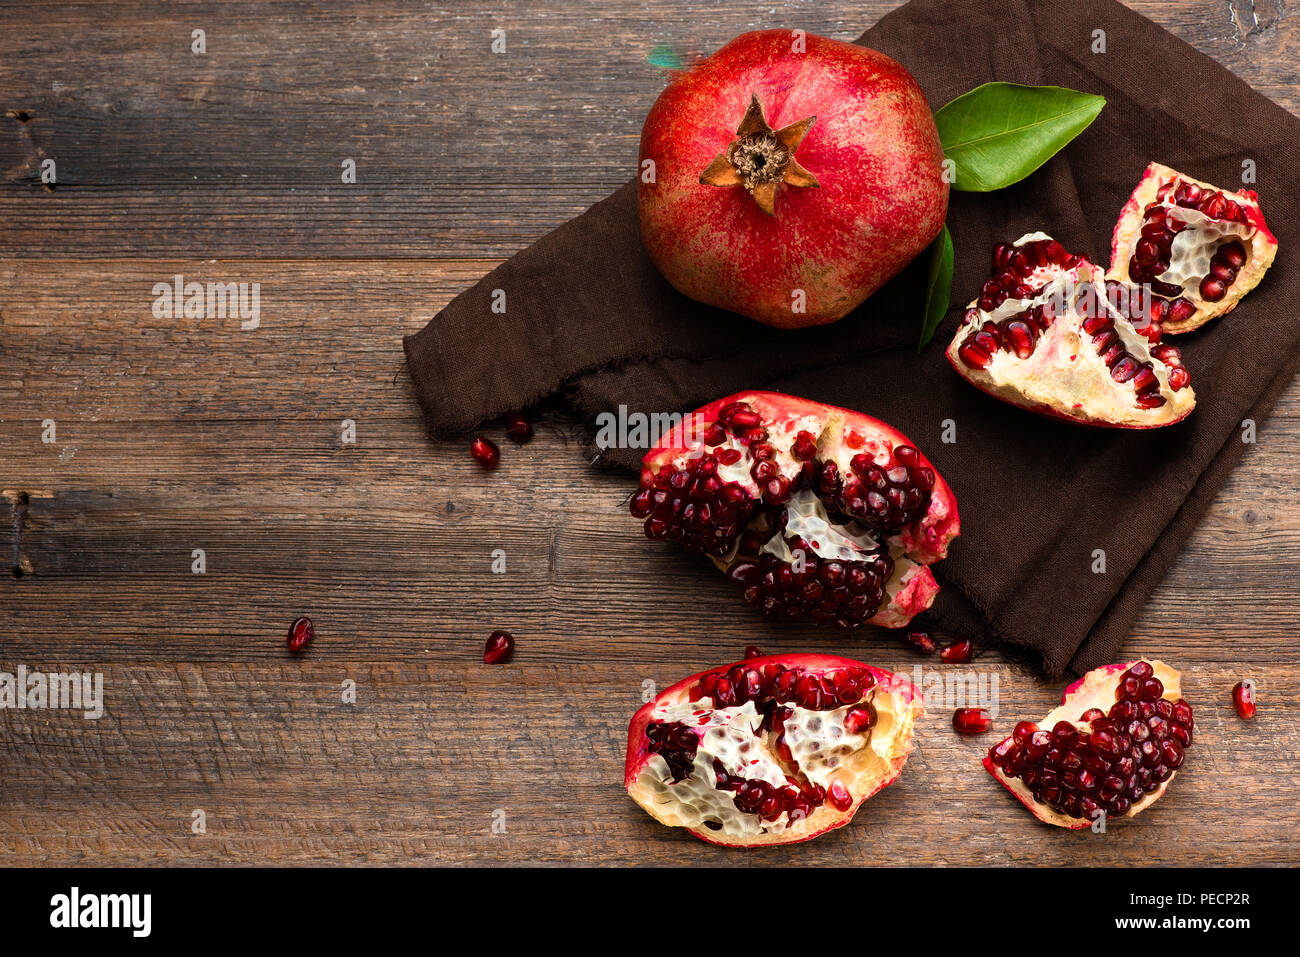 Pomegranate fruits with grains on wooden table. Top view. Stock Photo